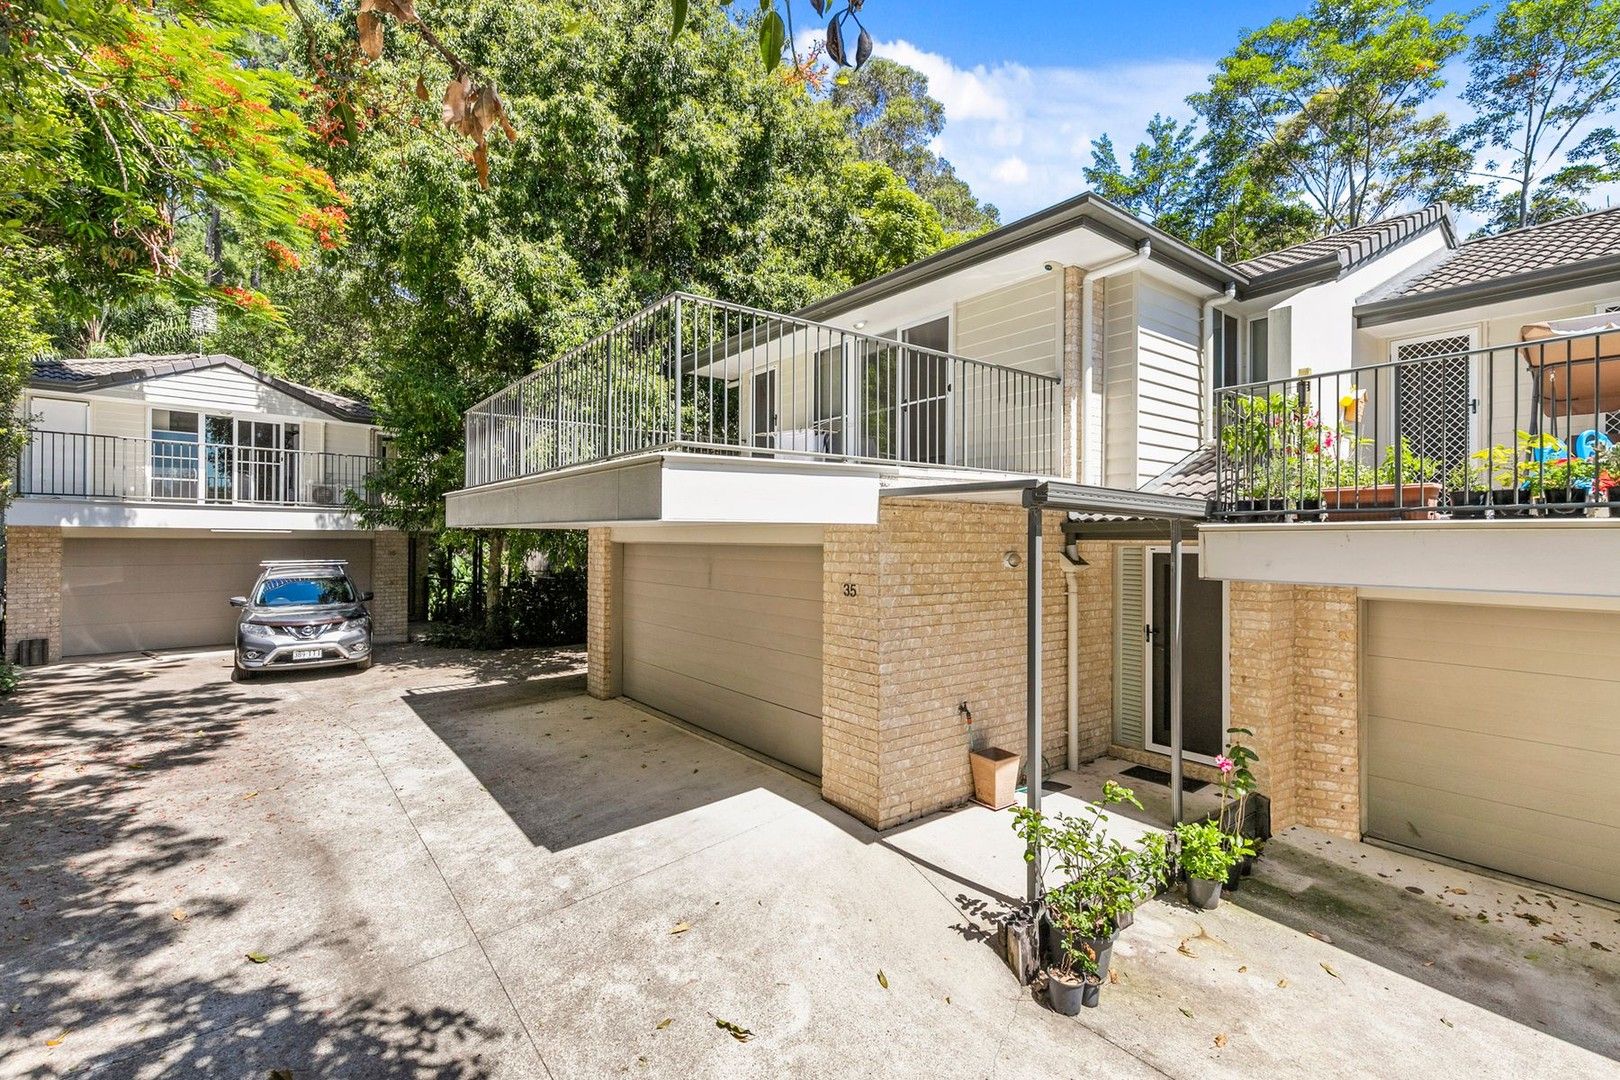 3 bedrooms Townhouse in 35/50 Aspland NAMBOUR QLD, 4560